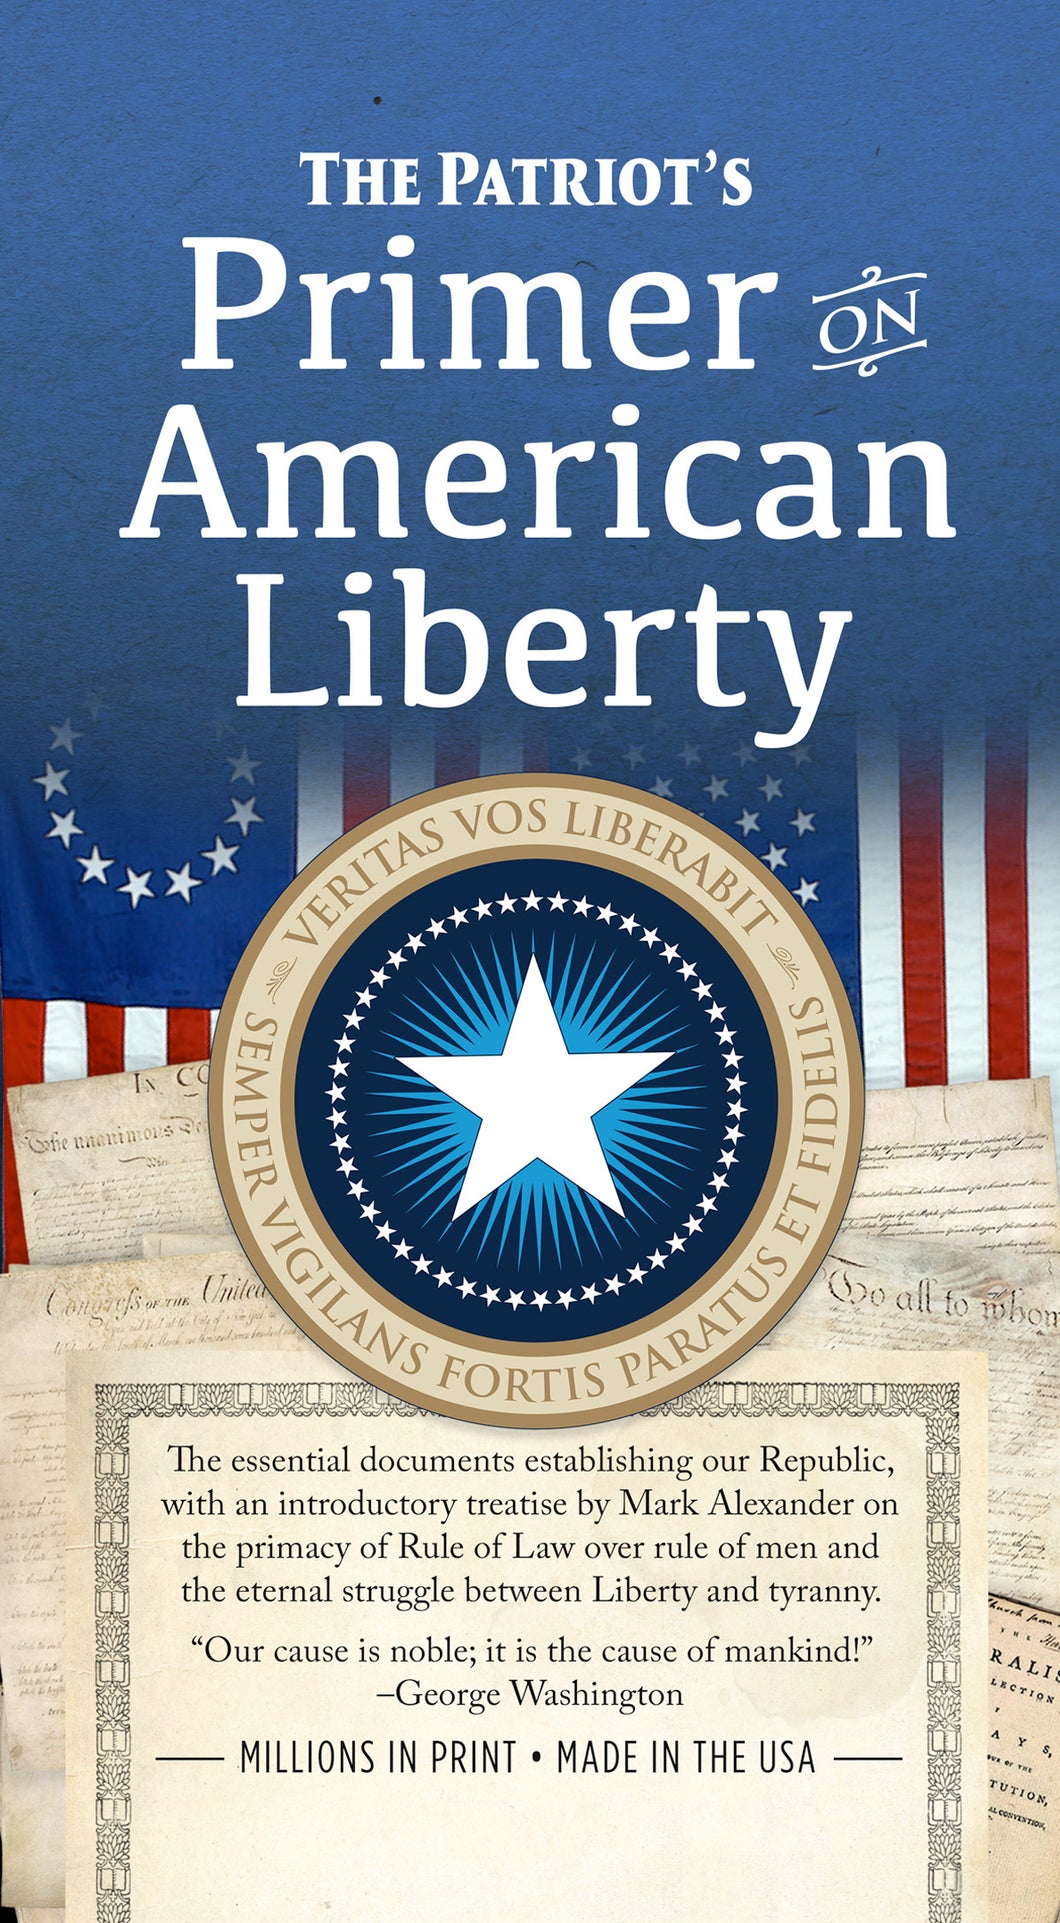 SAVE! The Patriot's Primer on American Liberty - 100 copies